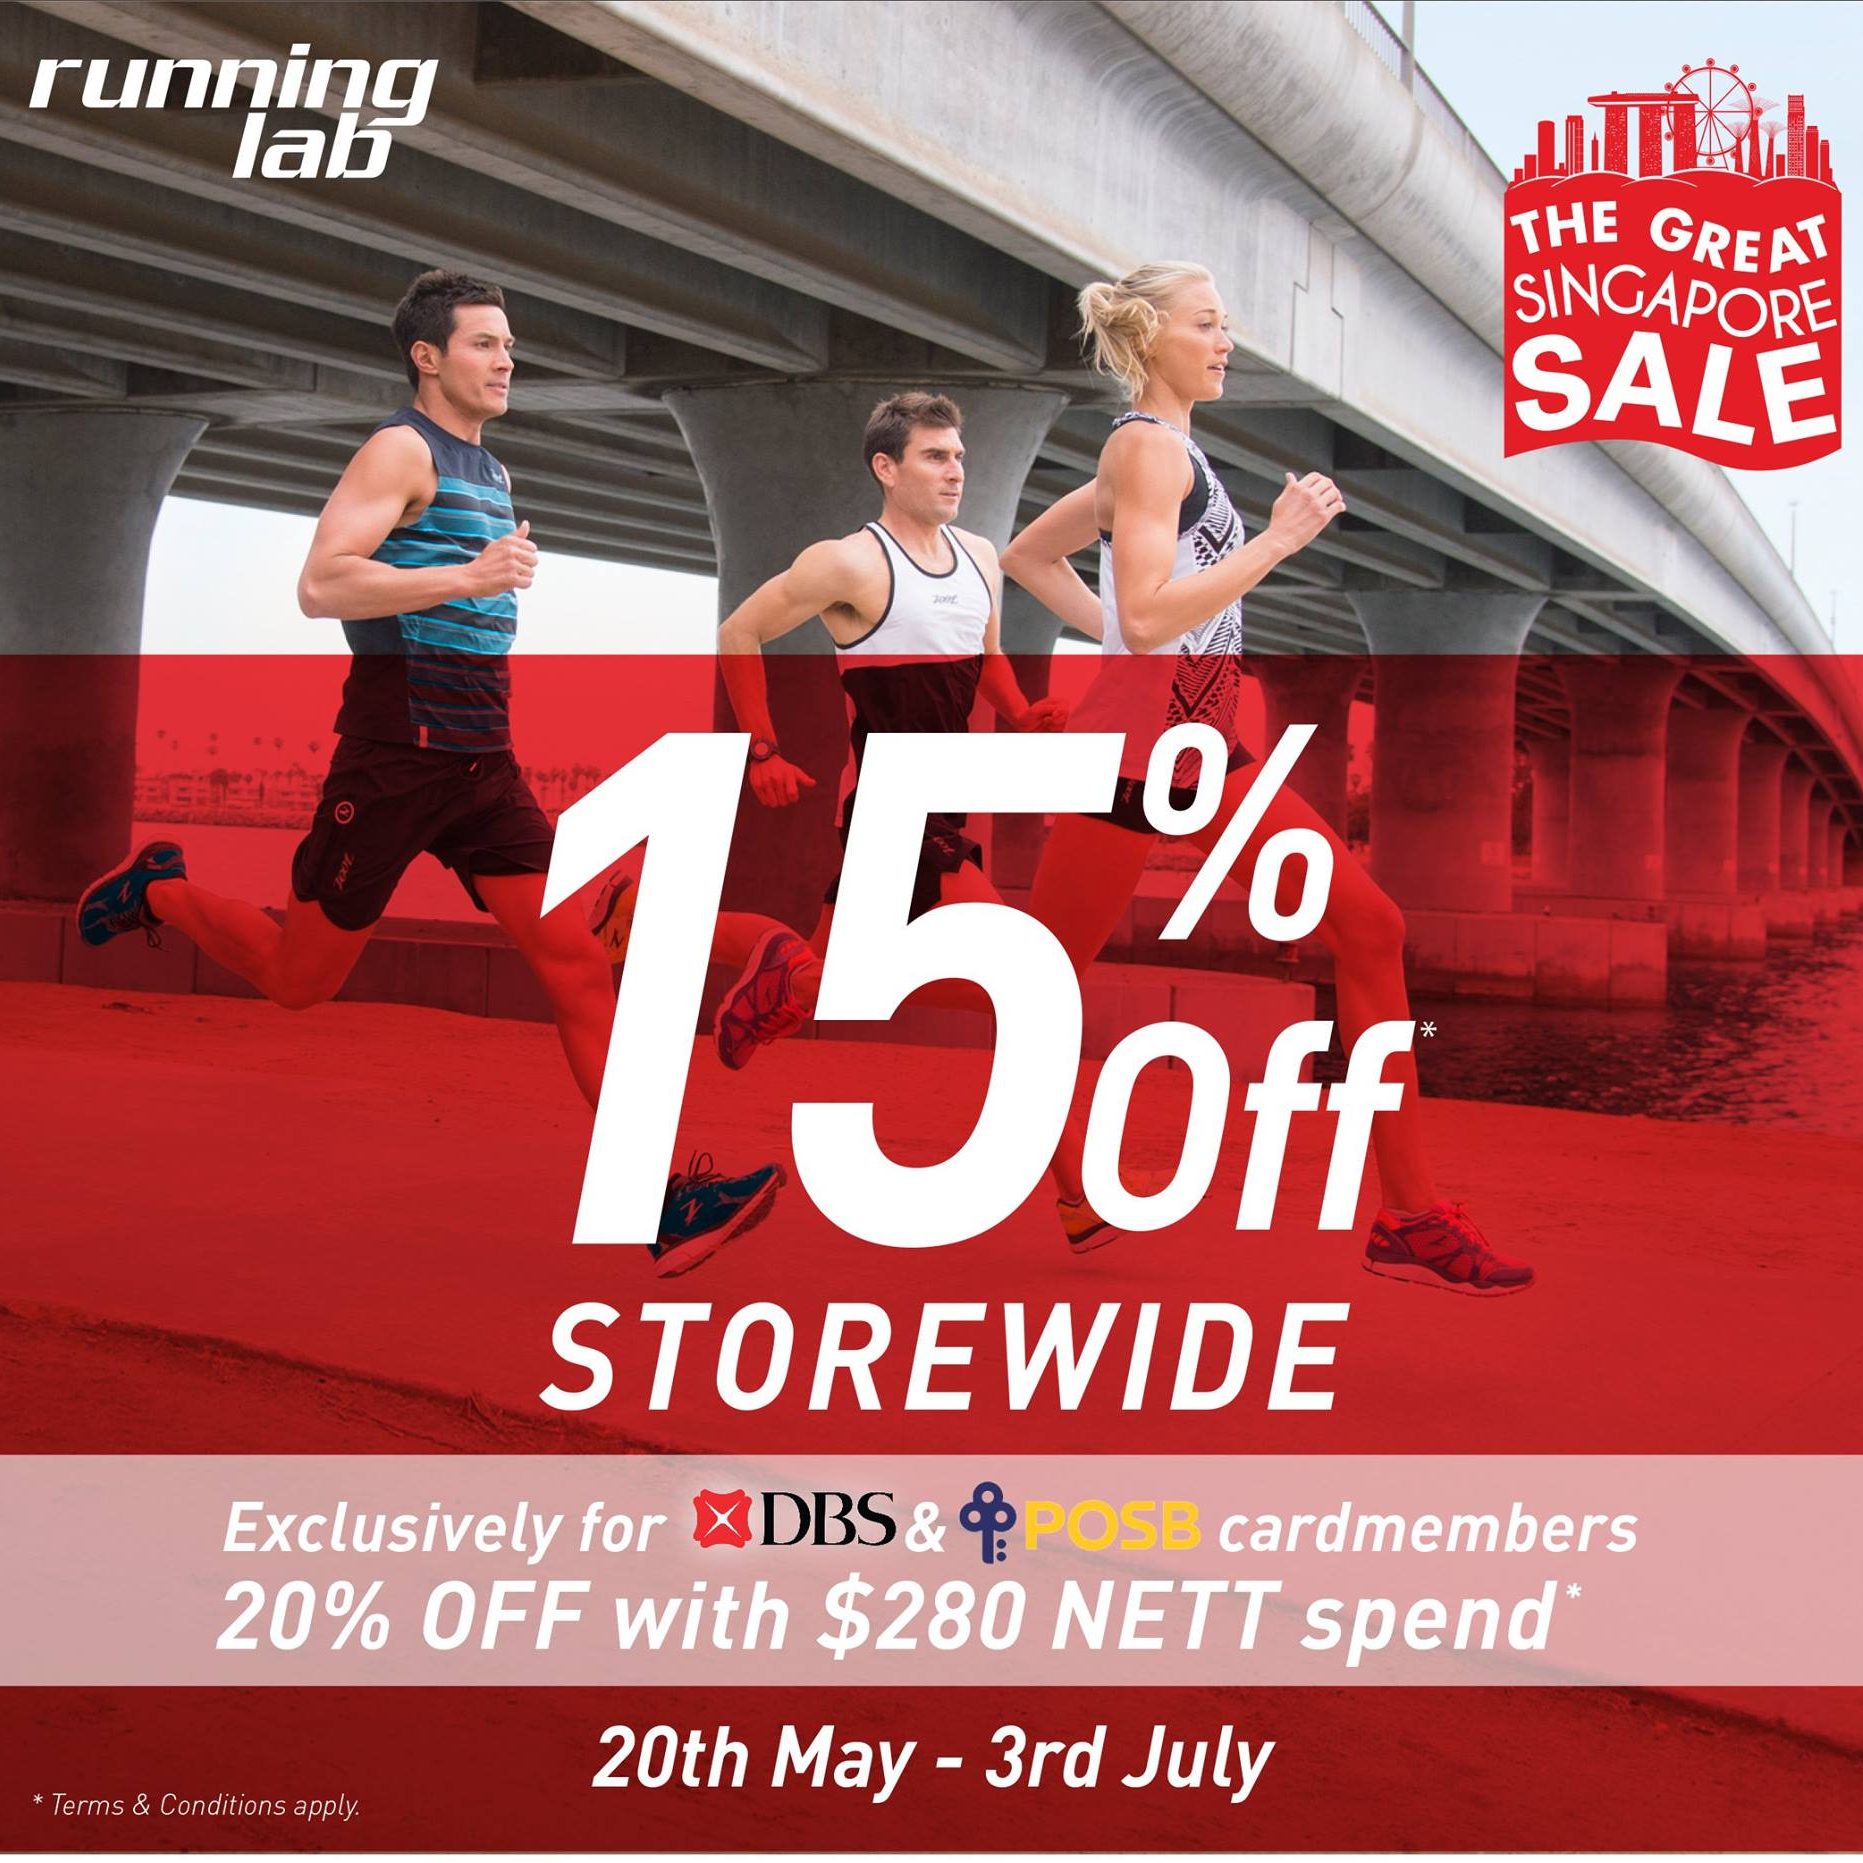 Running Lab SG GSS Up to 15% Off Storewide 20 May to 3 Jul 2016